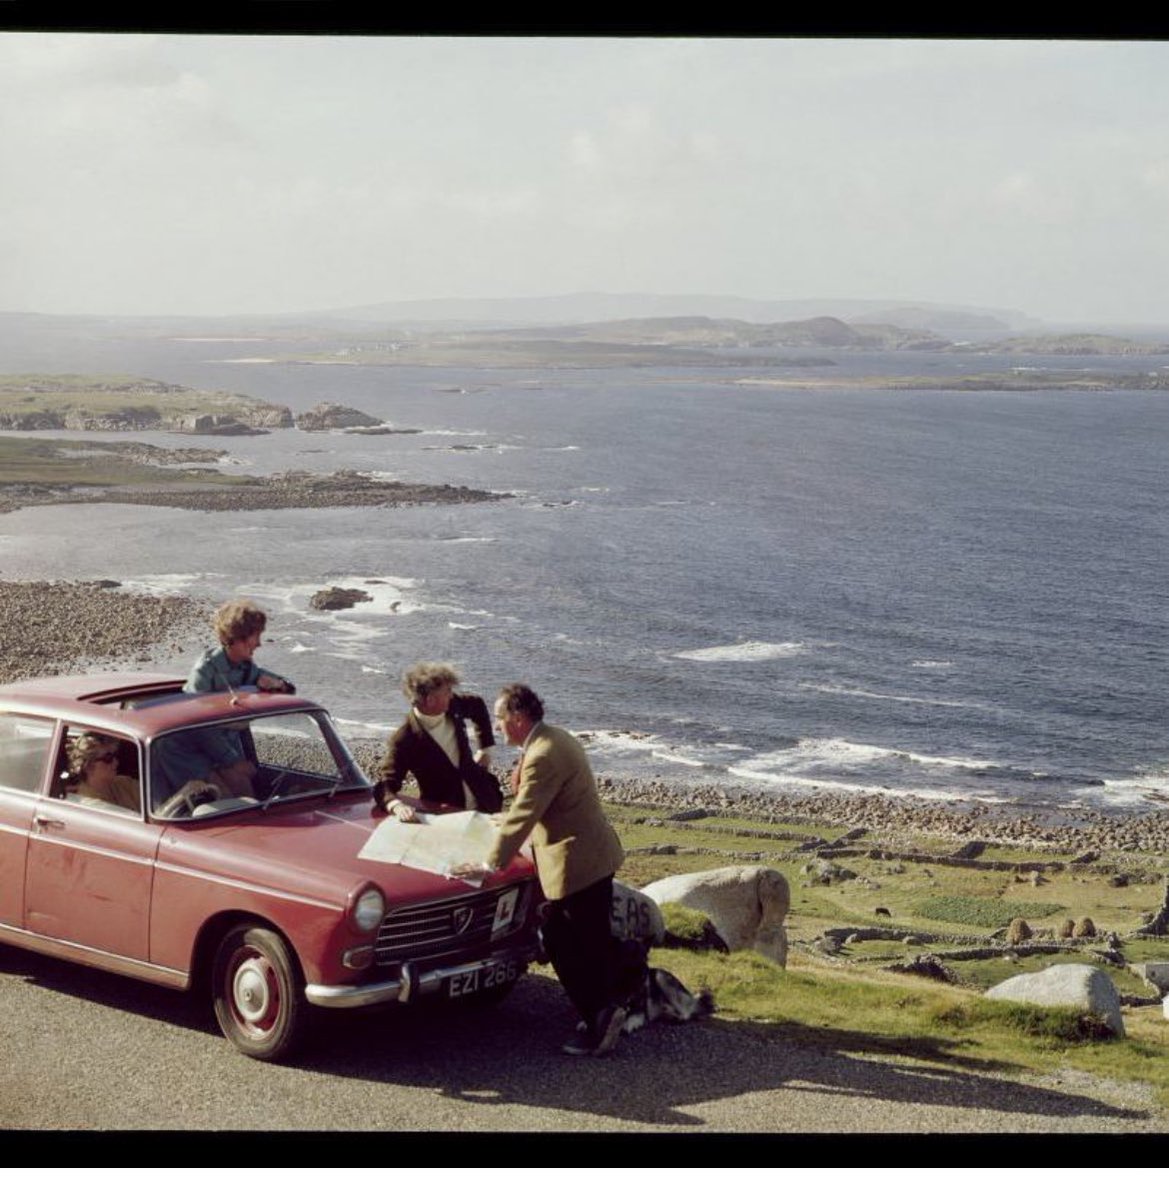 @johnhindeprints Love this old one from your Insta - I think it’s the view from Cnoc Fola (Bloody Foreland) in Donegal with Gola and Arranmore Islands in the distance